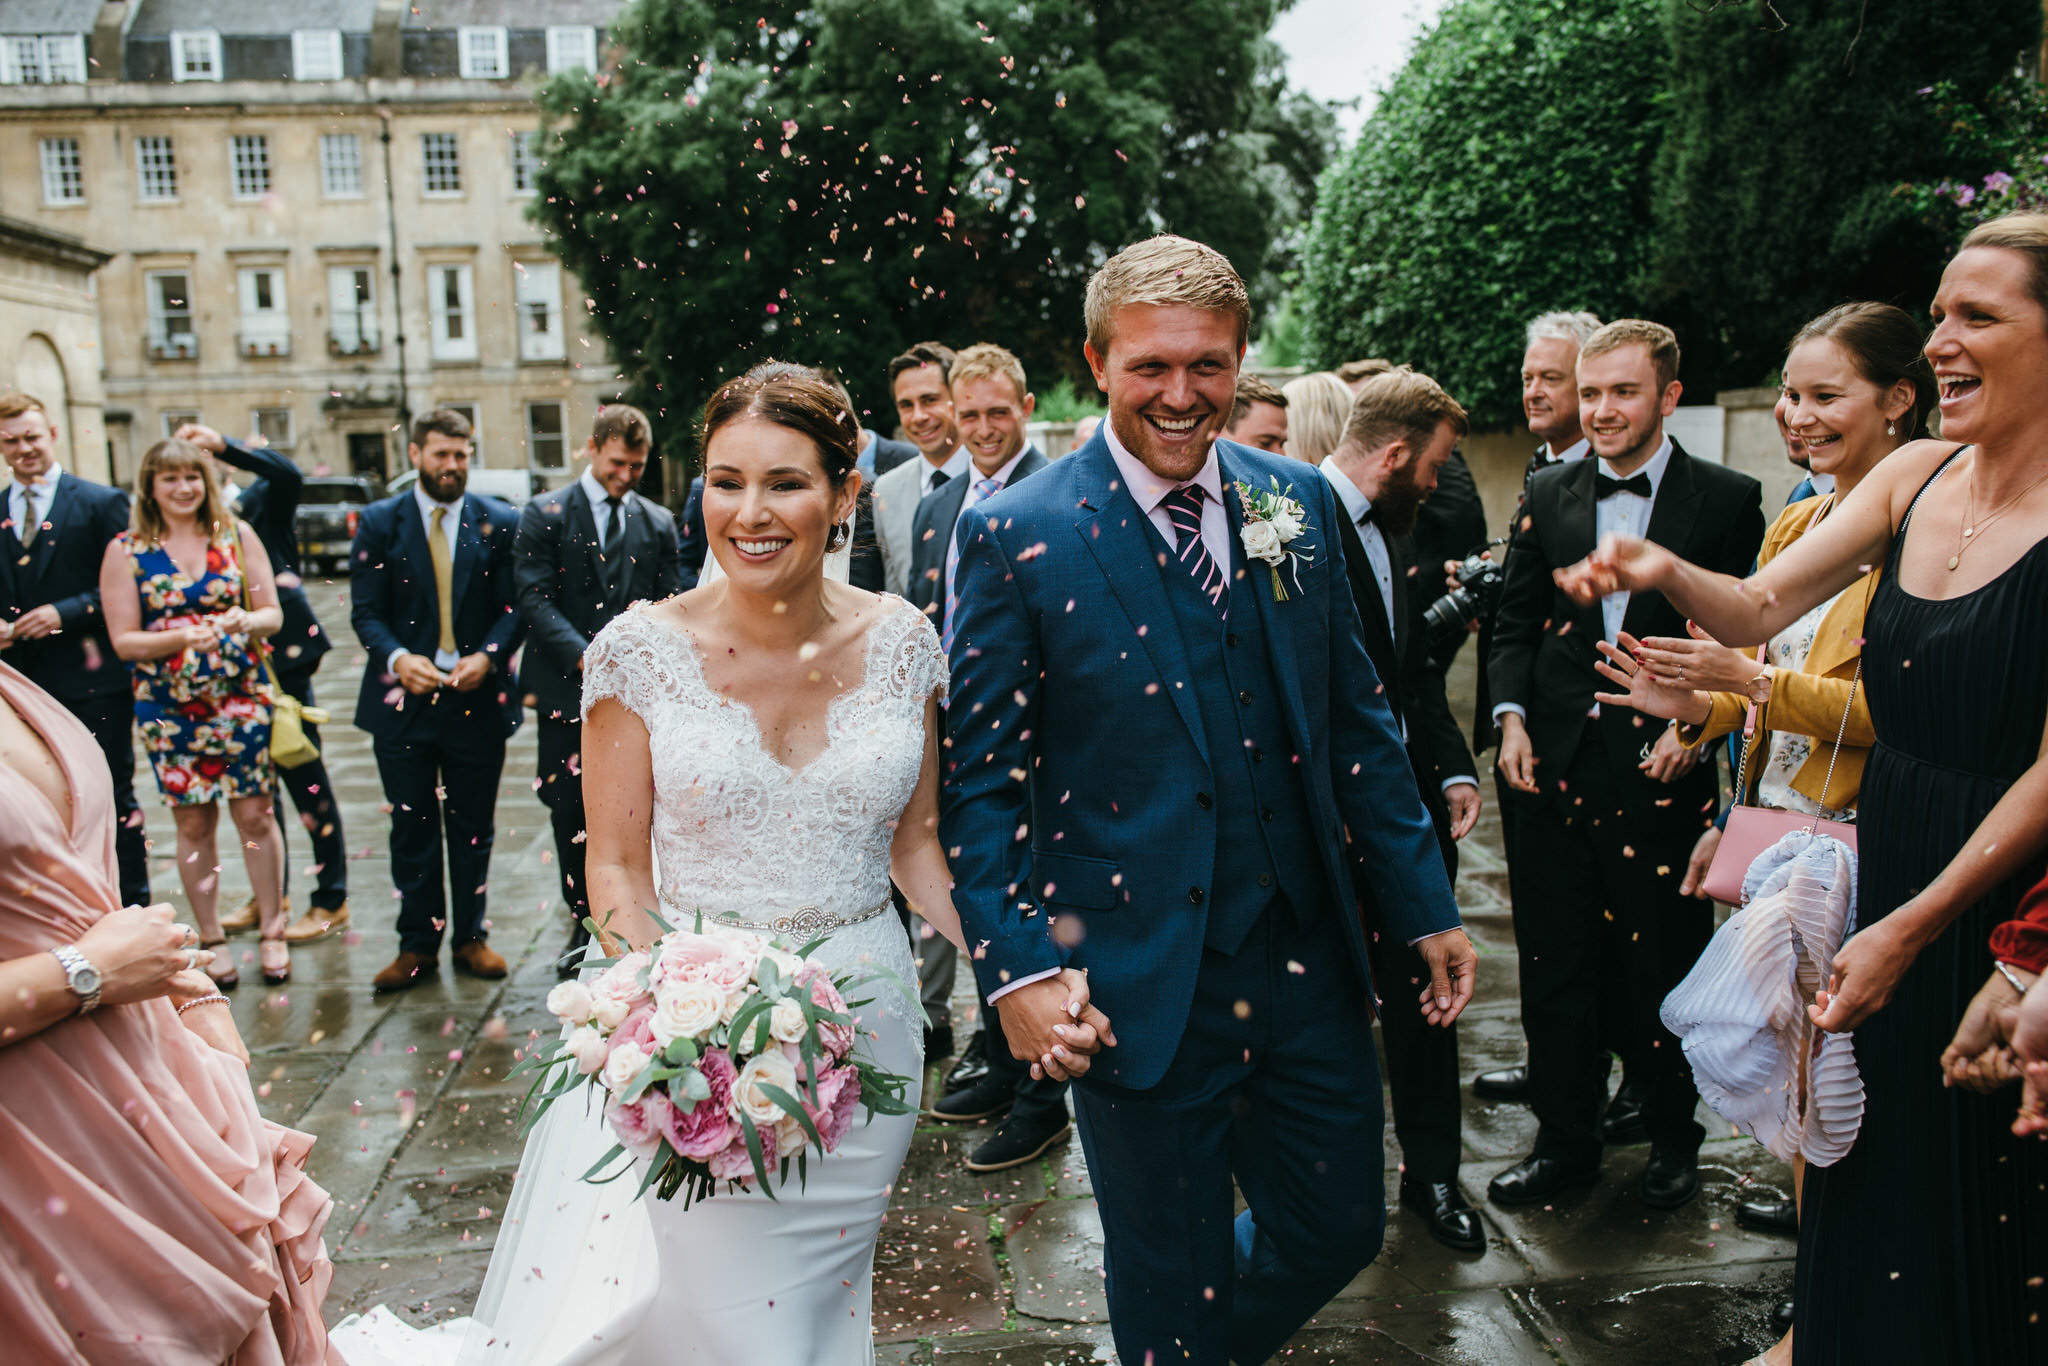 Bride and Groom walk through confetti after their wedding ceremony at the Assembly Rooms, Bath